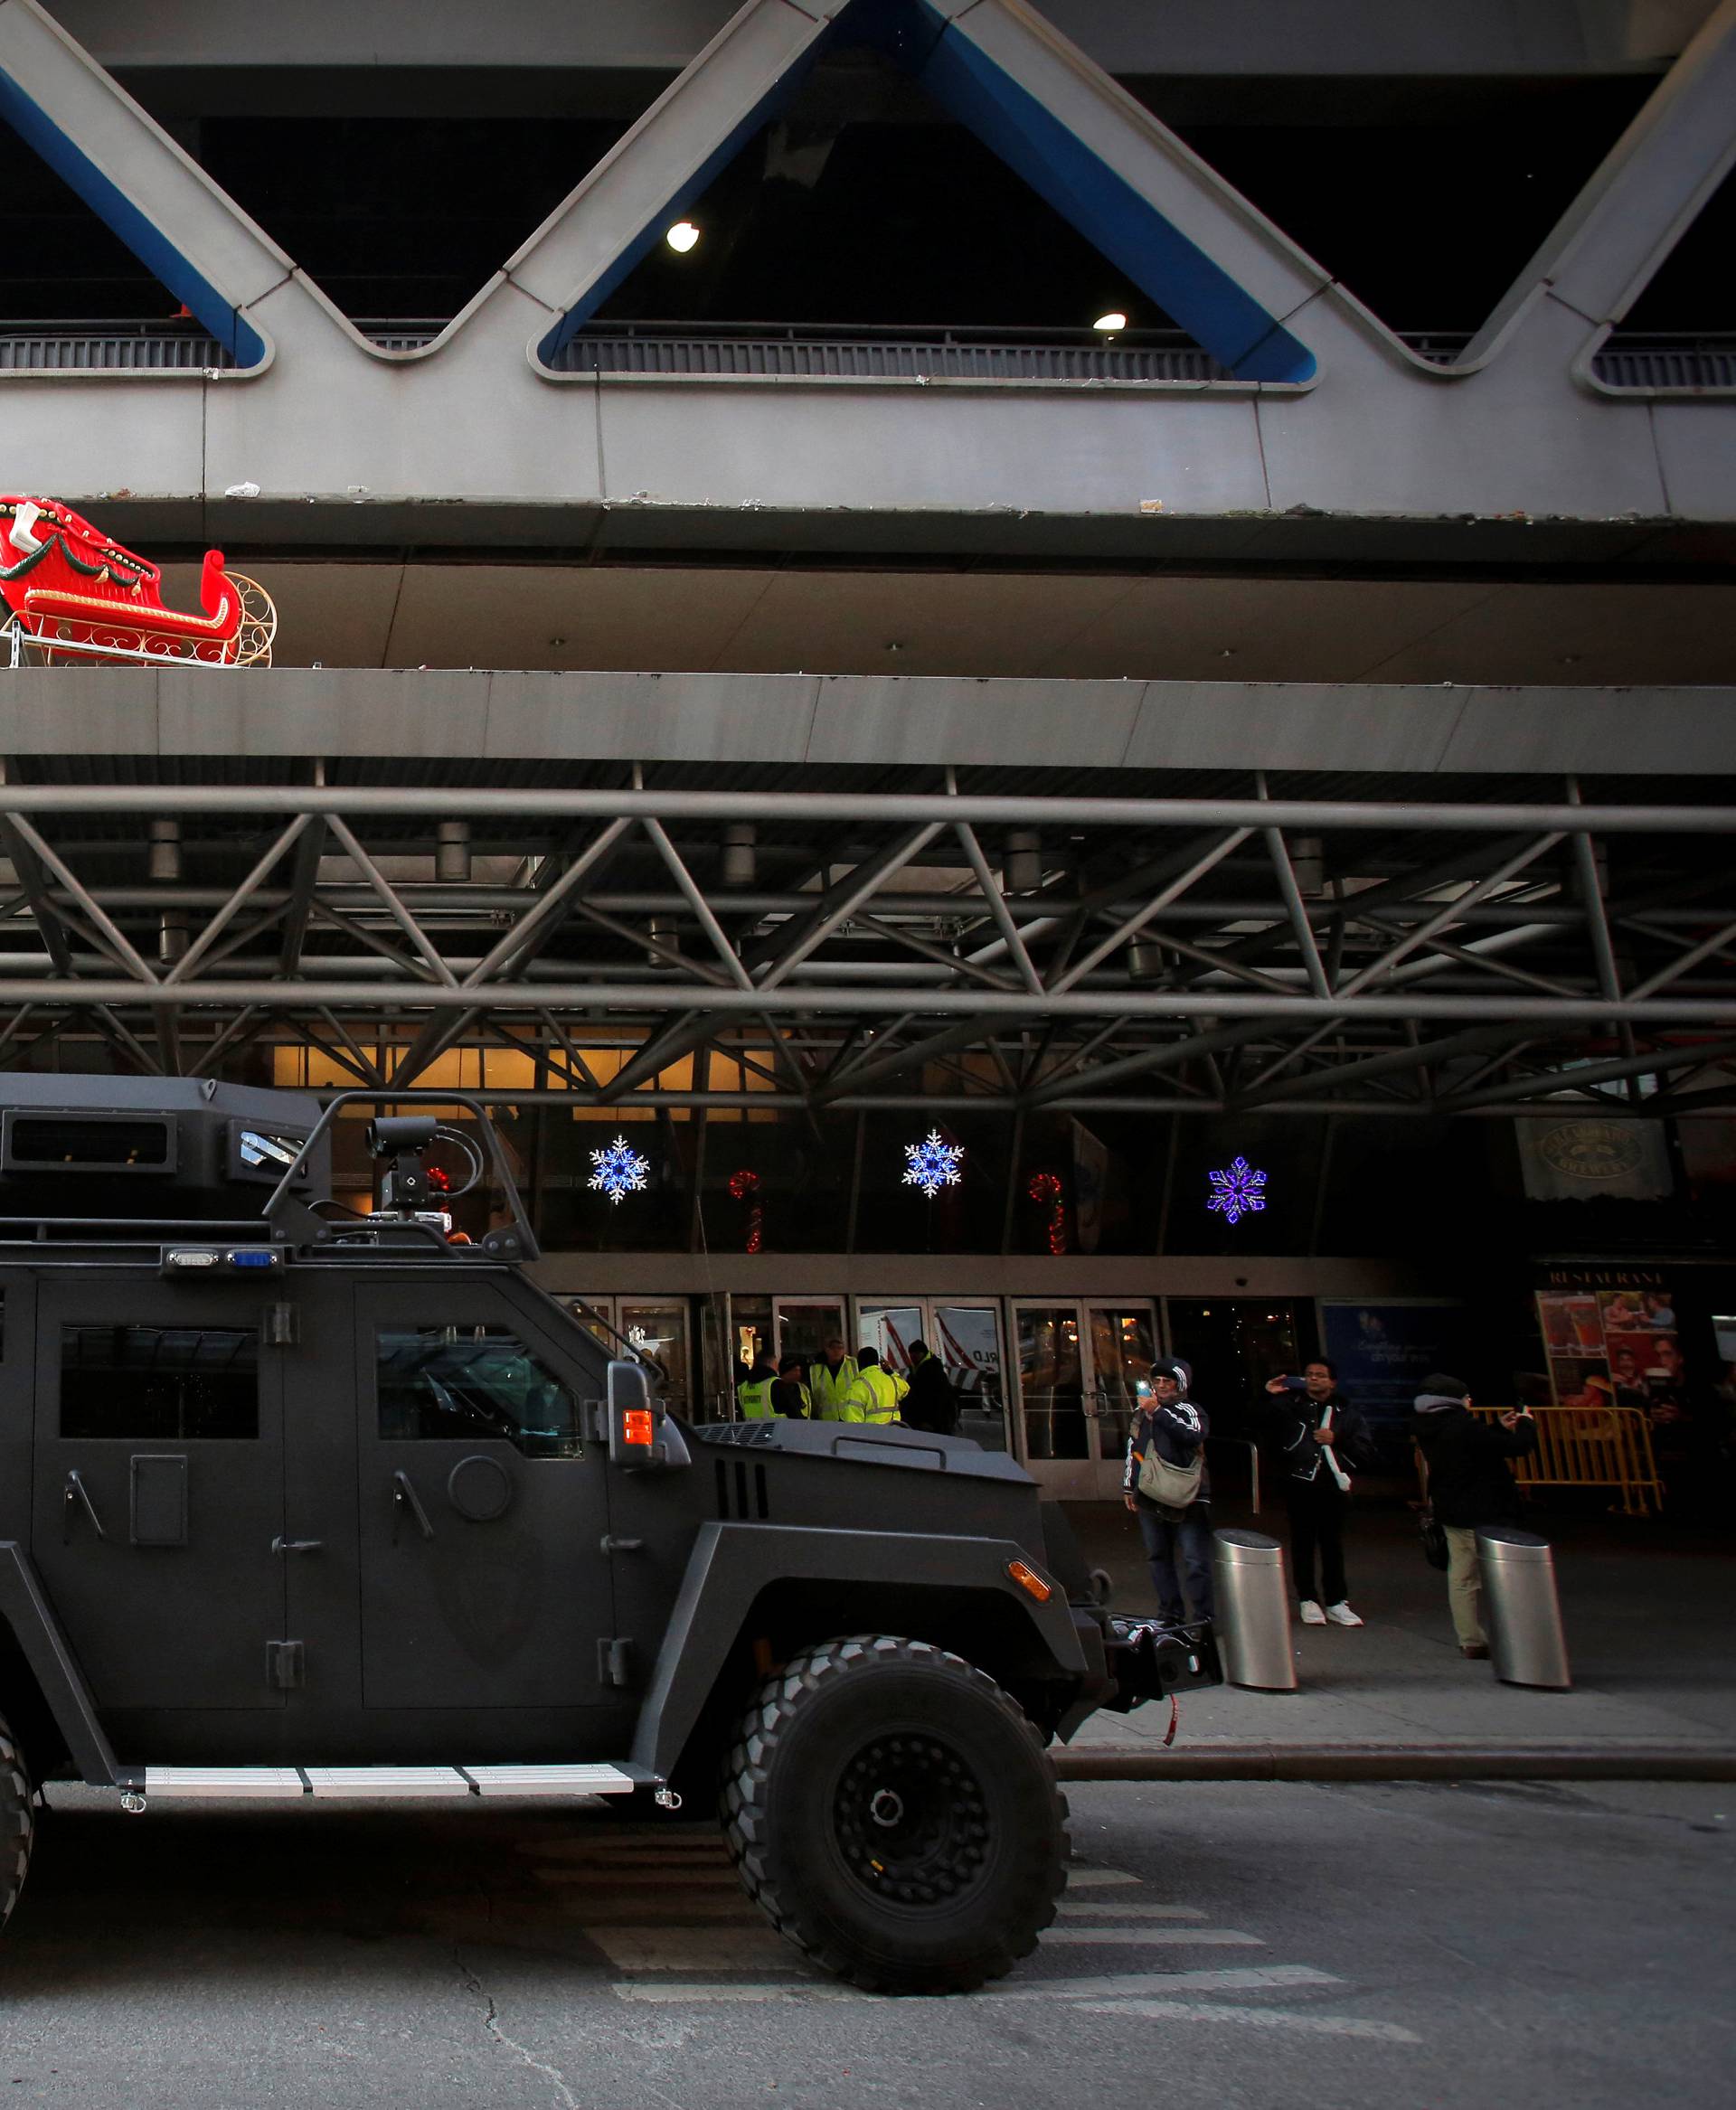 An armored vehicle belonging to the New York Port Authority sits beneath a Christmas decoration at the entrance of the New York Port Authority Bus Terminal following an attempted detonation during the morning rush hour, in New York City